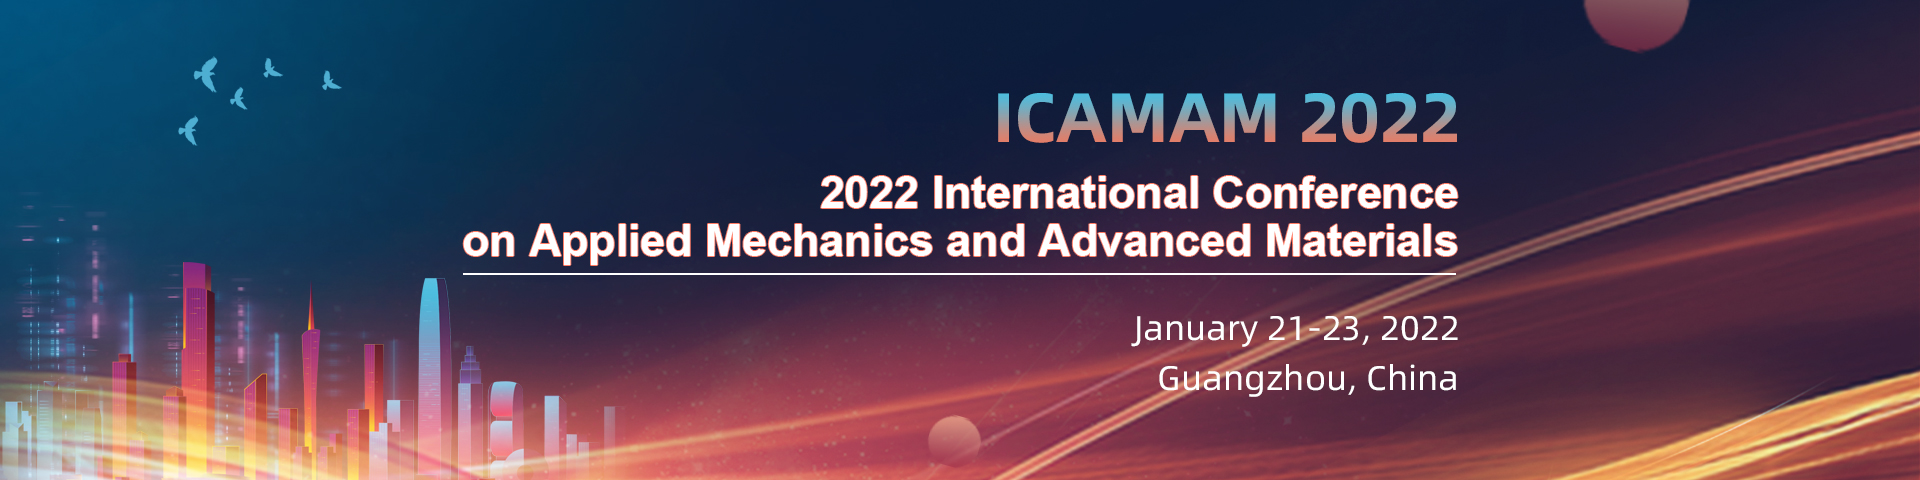 2022 International Conference on Applied Mechanics and Advanced Materials (ICAMAM 2022), Guangzhou, Guangdong, China